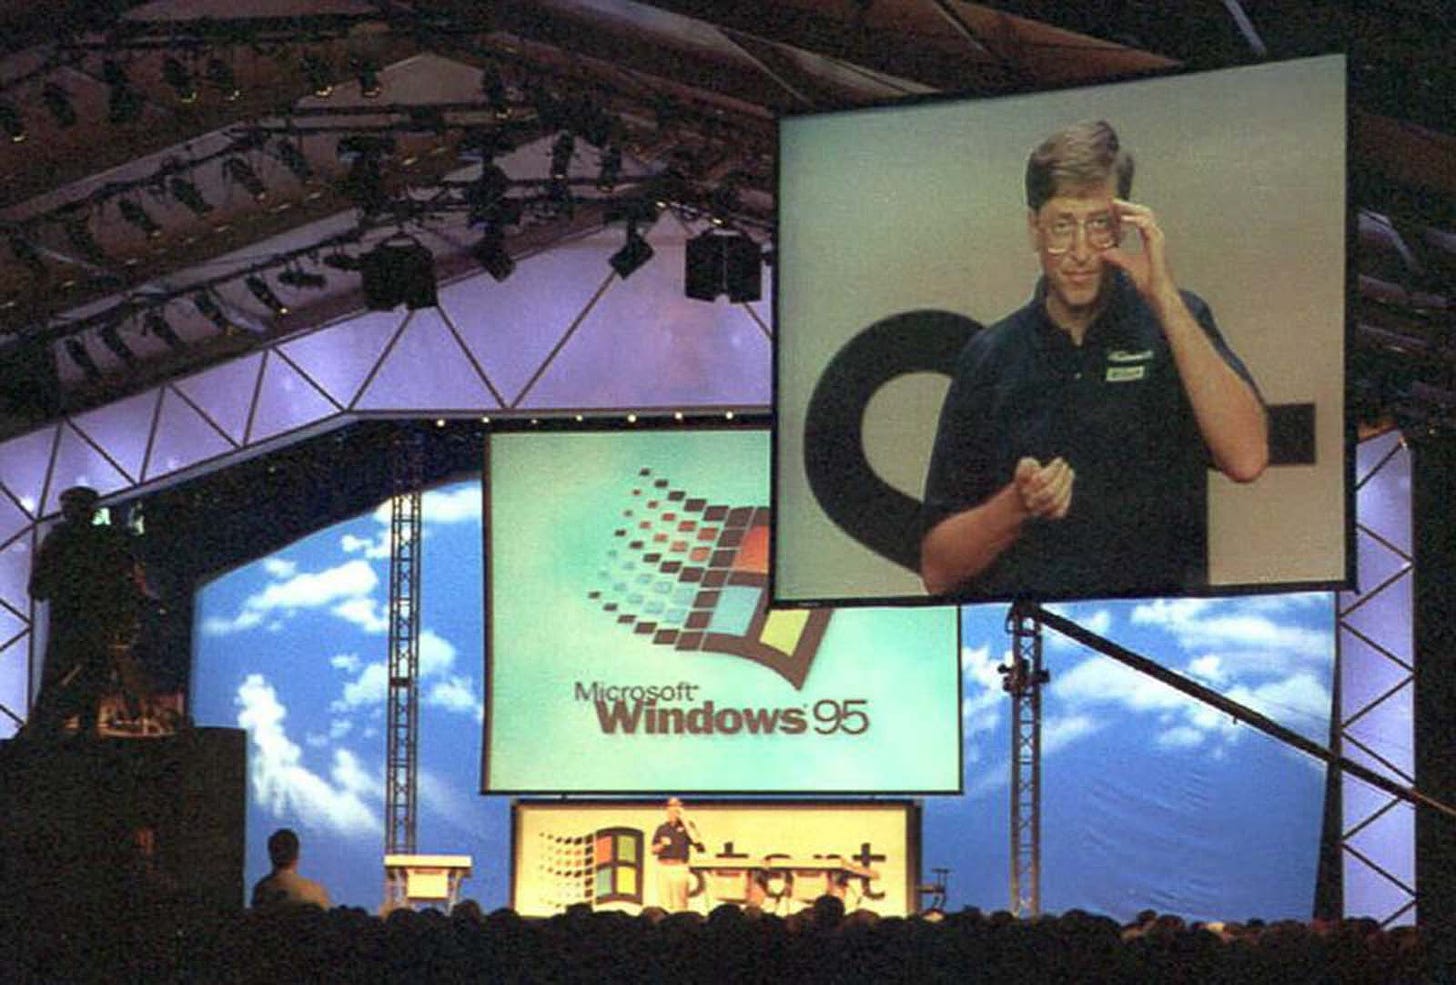 Microsoft CEO Bill Gates launches Windows 95 before a crowd of thousands in Redmond, Washington.